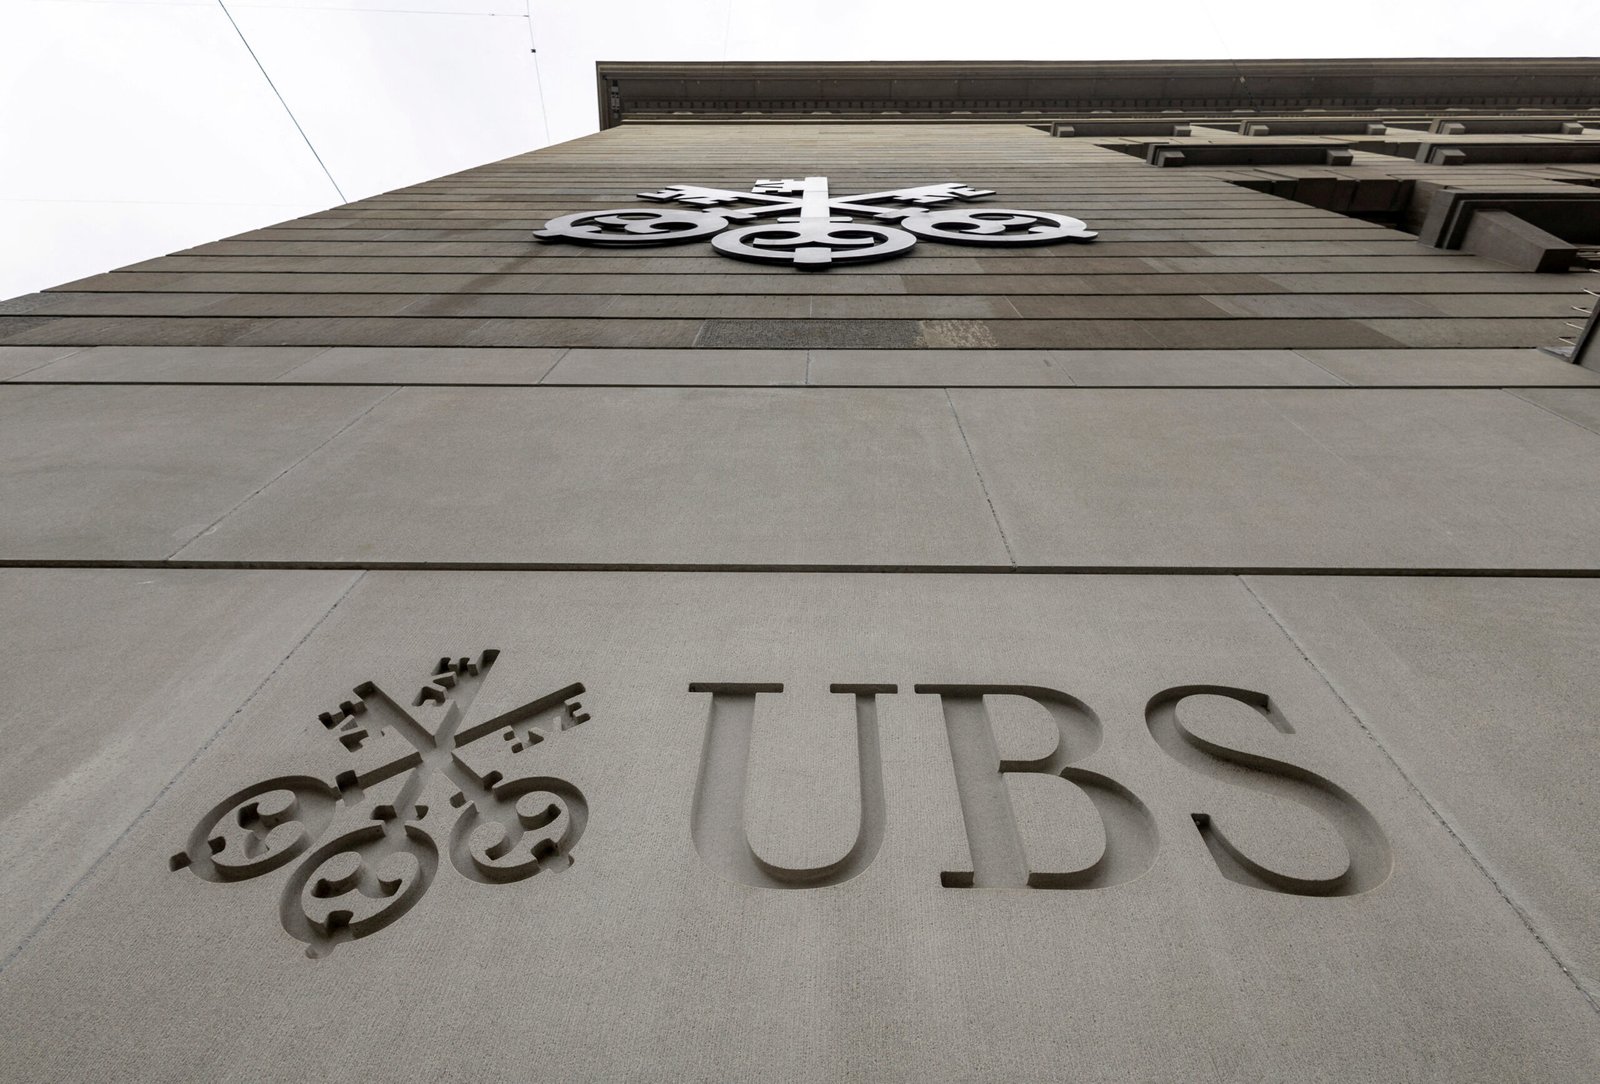 ubs-says-not-aware-of-doj-probe-into-sanctions-related-compliance-failures